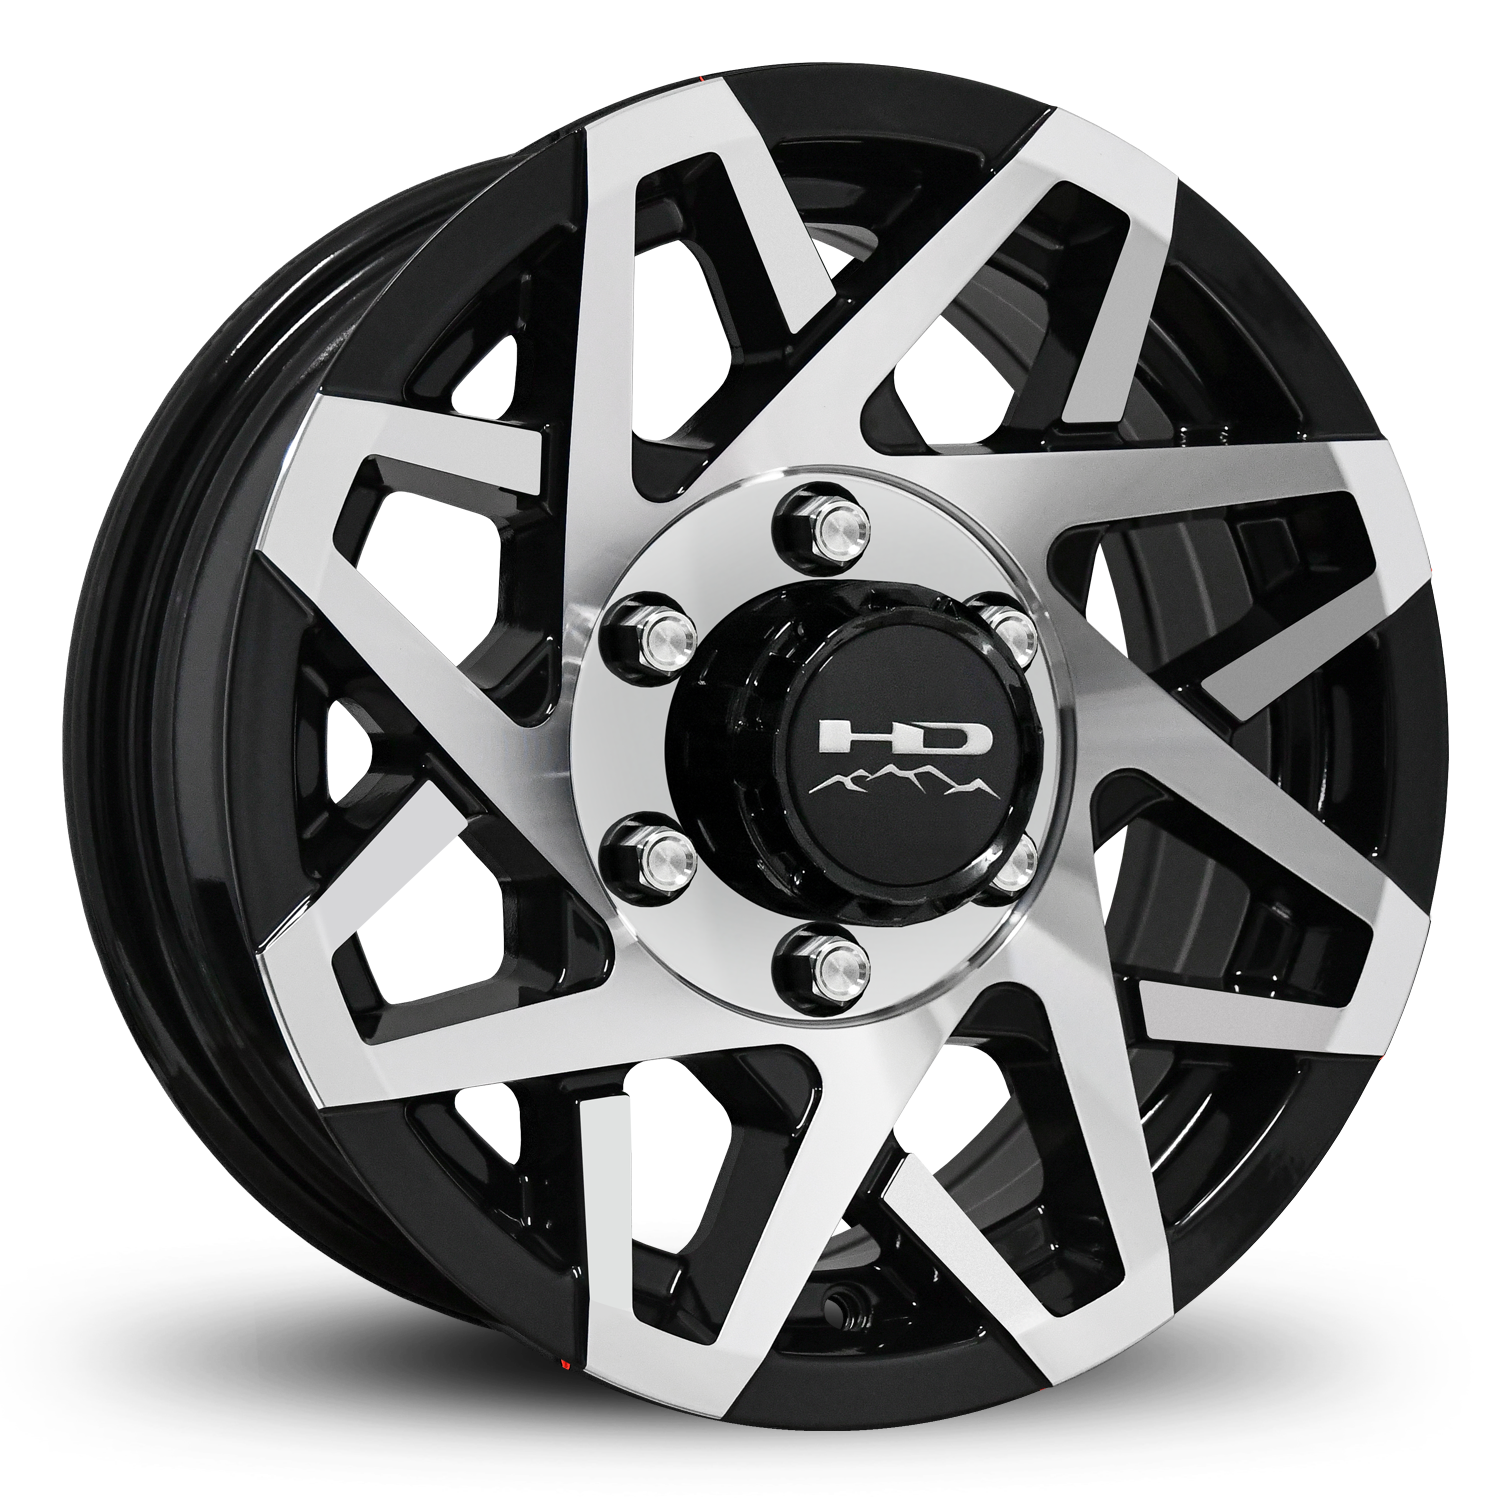 HD Off-Road Canyon Custom Trailer Wheel Rims in 16x6.0 16x6 Gloss Black Machined Face with Center Cap & Logo fits 6x5.50 / 6x139.7 Axle Boat, Car, RV, Travel, Concession, Horse, Utility, Lawn & Garden, & Landscaping.